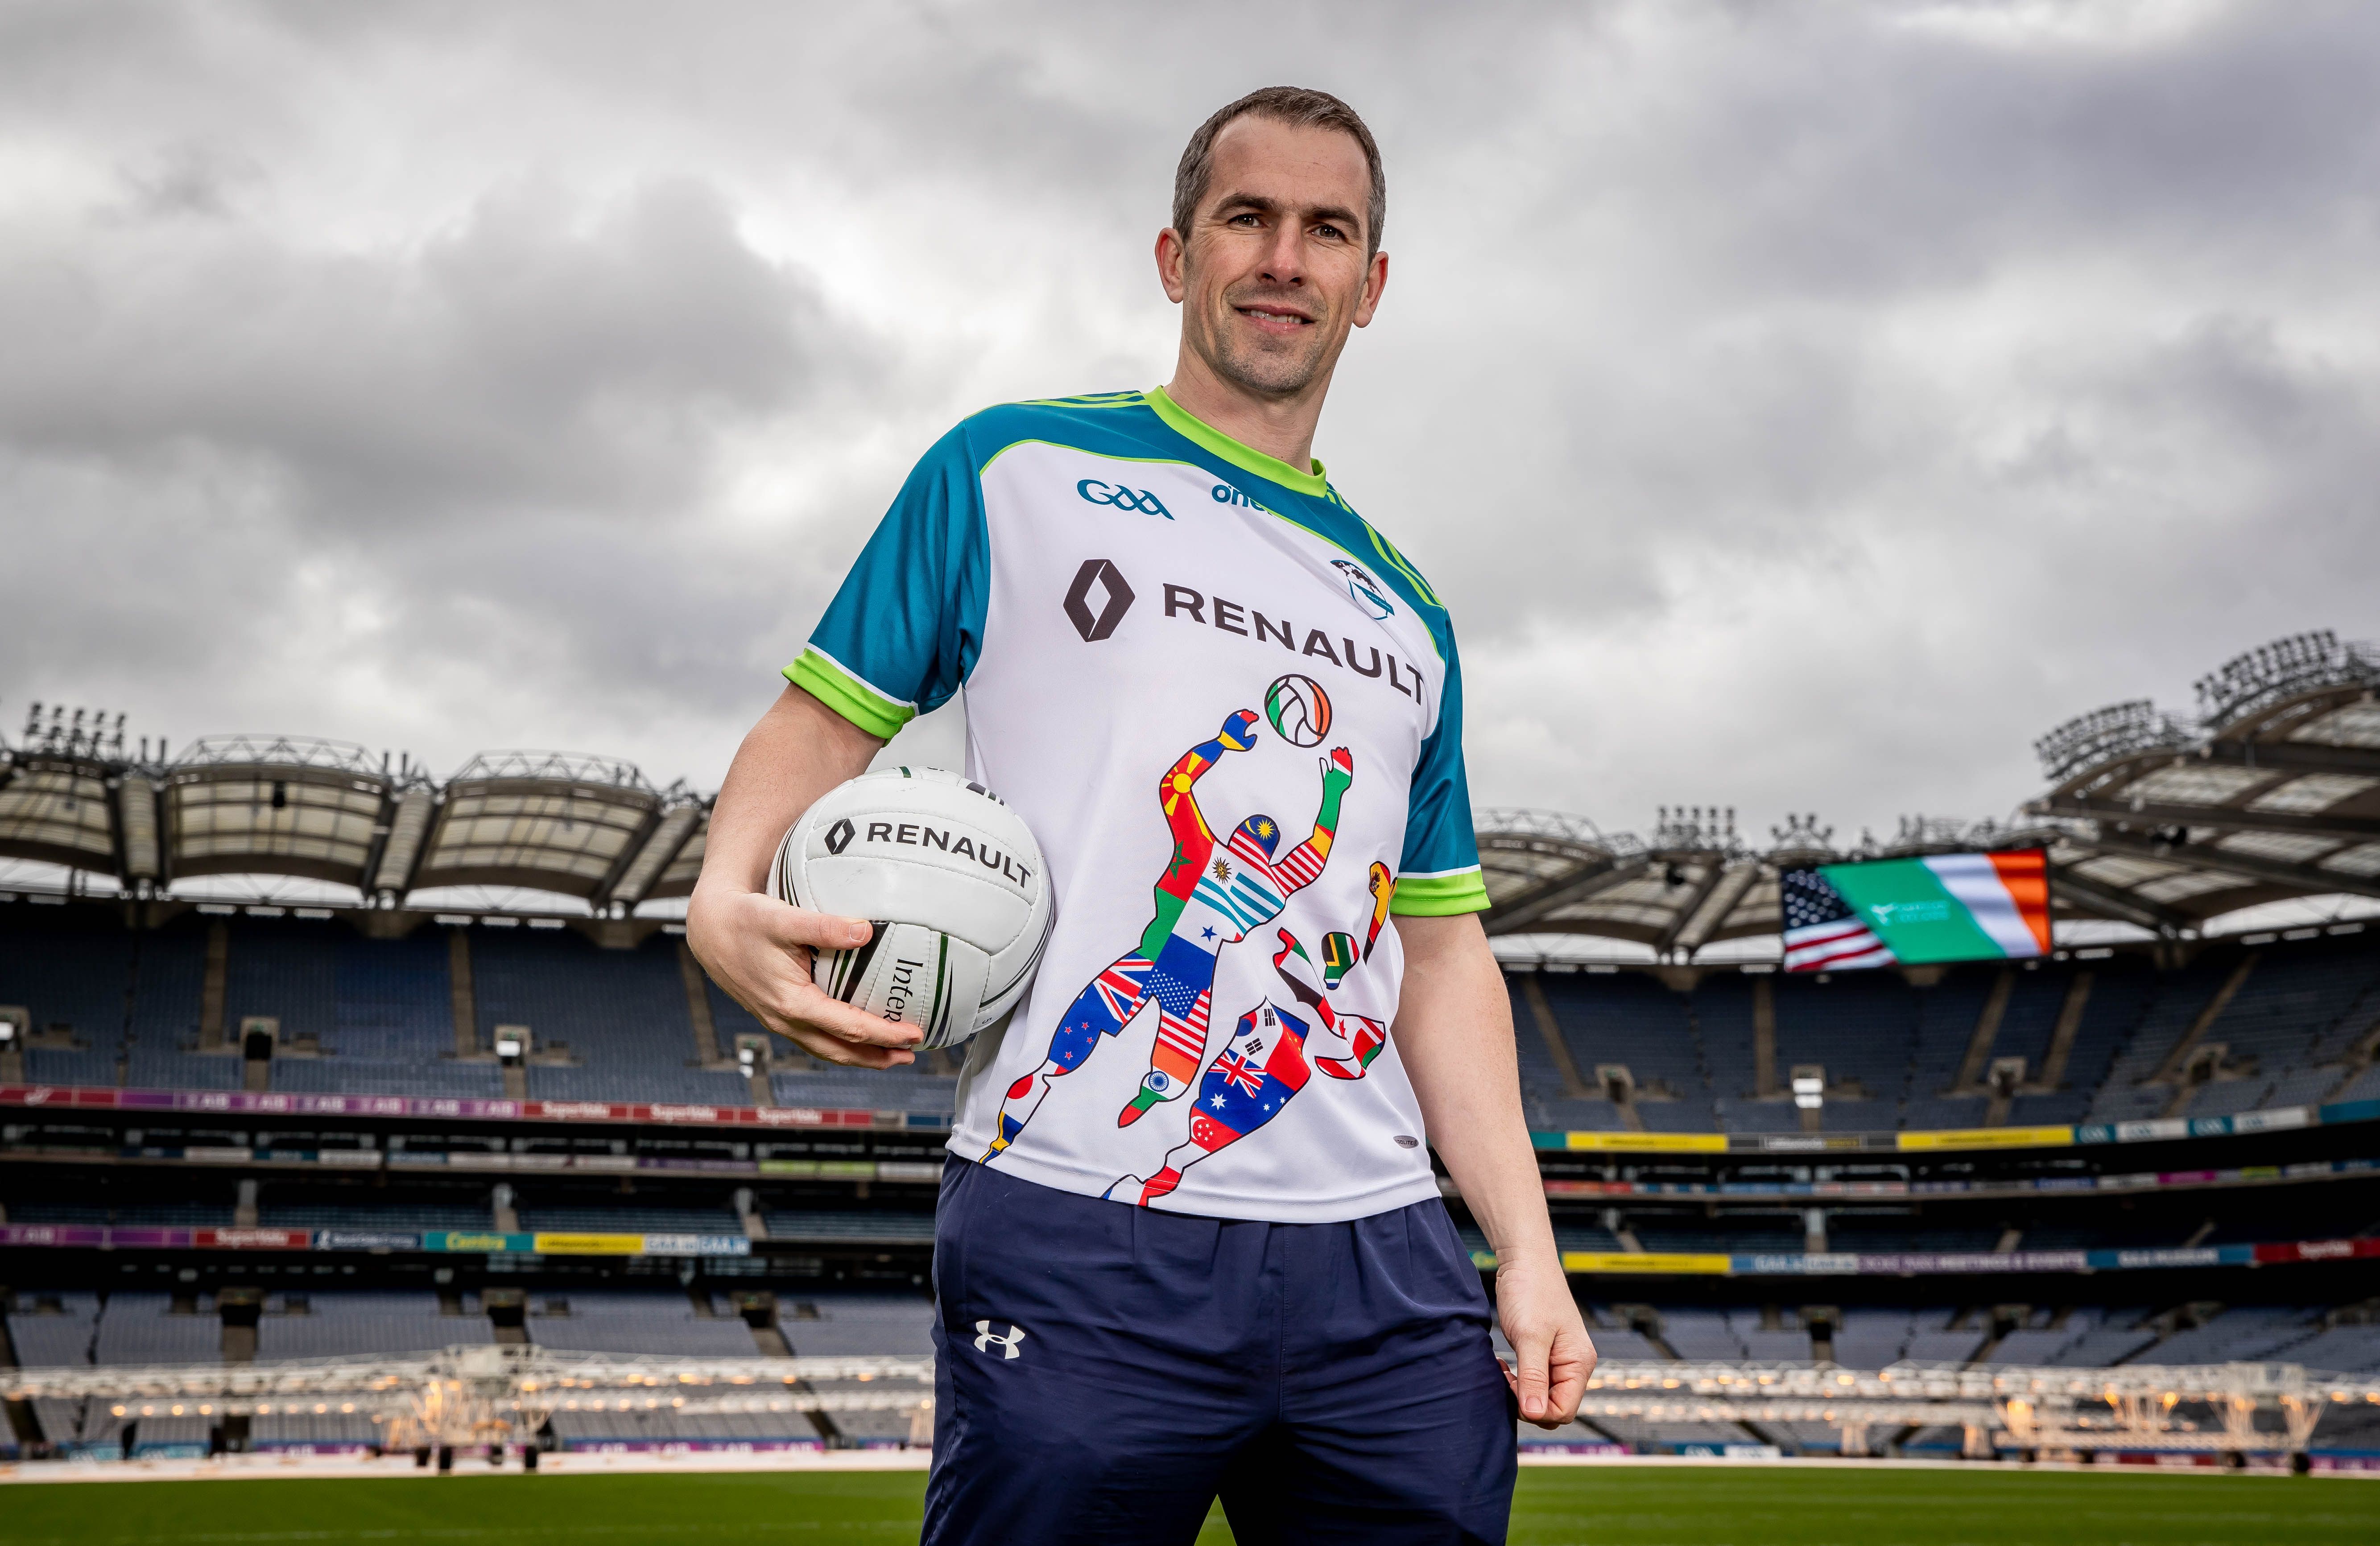 GAA announces 2023 fixture schedule for all competitions with